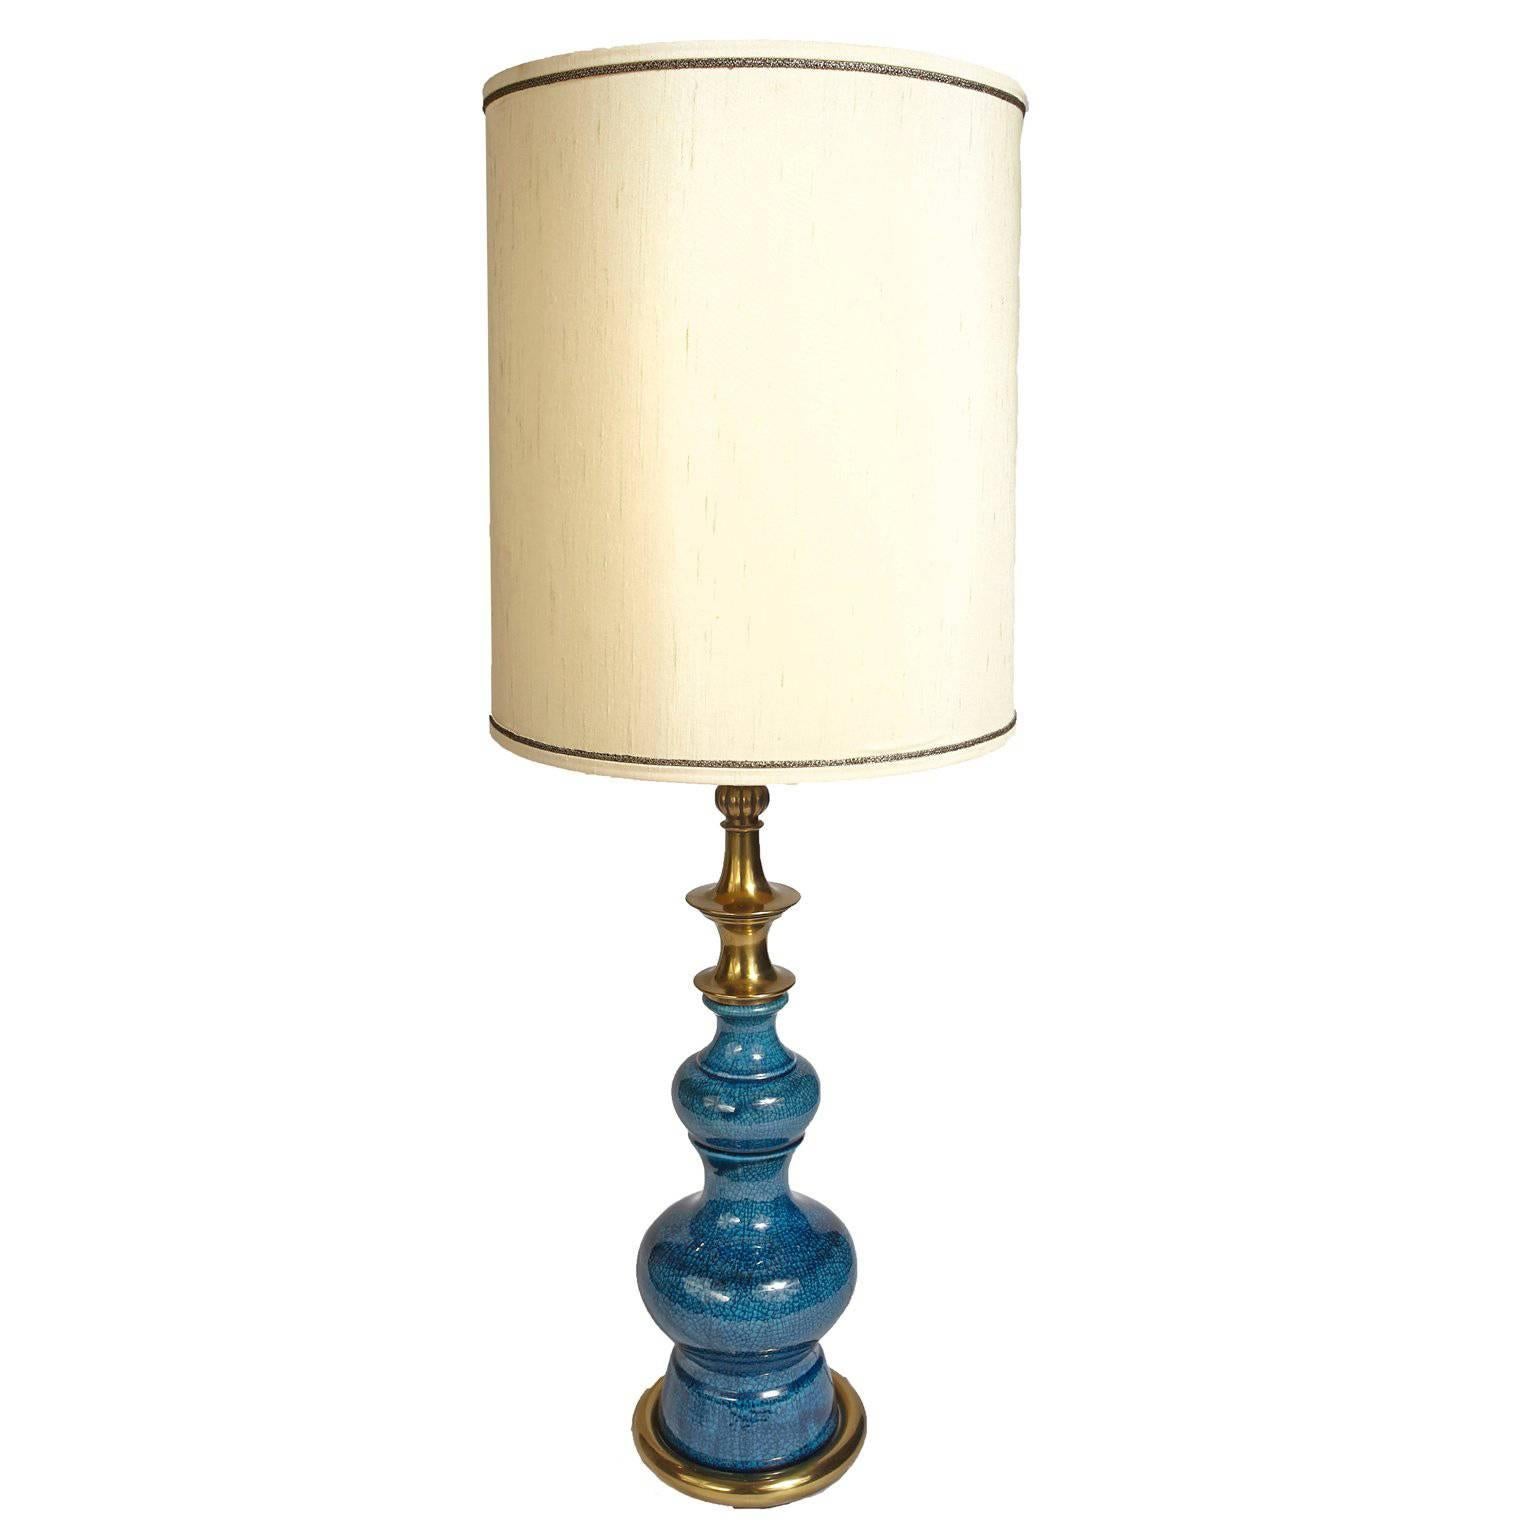 Stiffel, Blue Ceramic, Mid-Century Modern Table Lamp with Original Shade For Sale